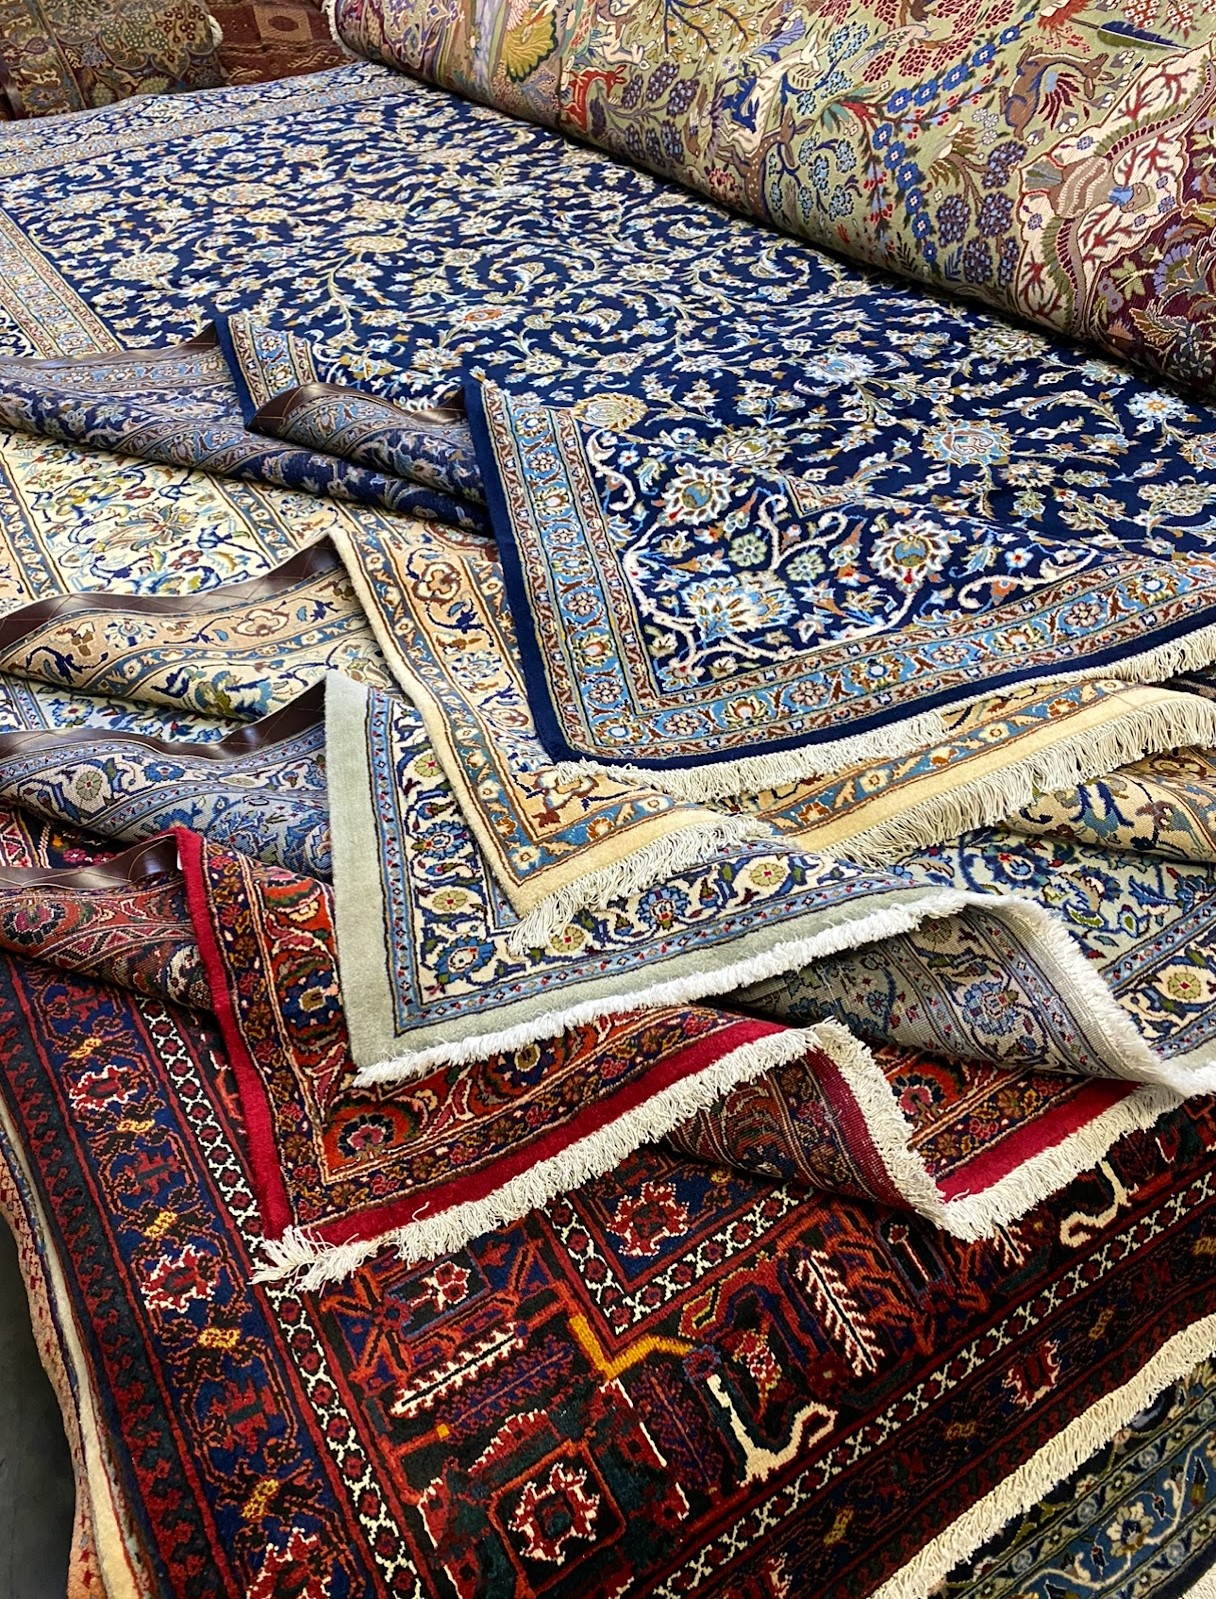 A visually stunning Persian rug displayed on a floor. Its intricate designs and vibrant colors reflect the artistry and storytelling embedded in these timeless pieces. The rug evokes a sense of enchantment and cultural heritage, showcasing the craftsmanship that brings it to life. This captivating rug is a testament to the rich tradition of Persian rug weaving, offered by RugMaster.